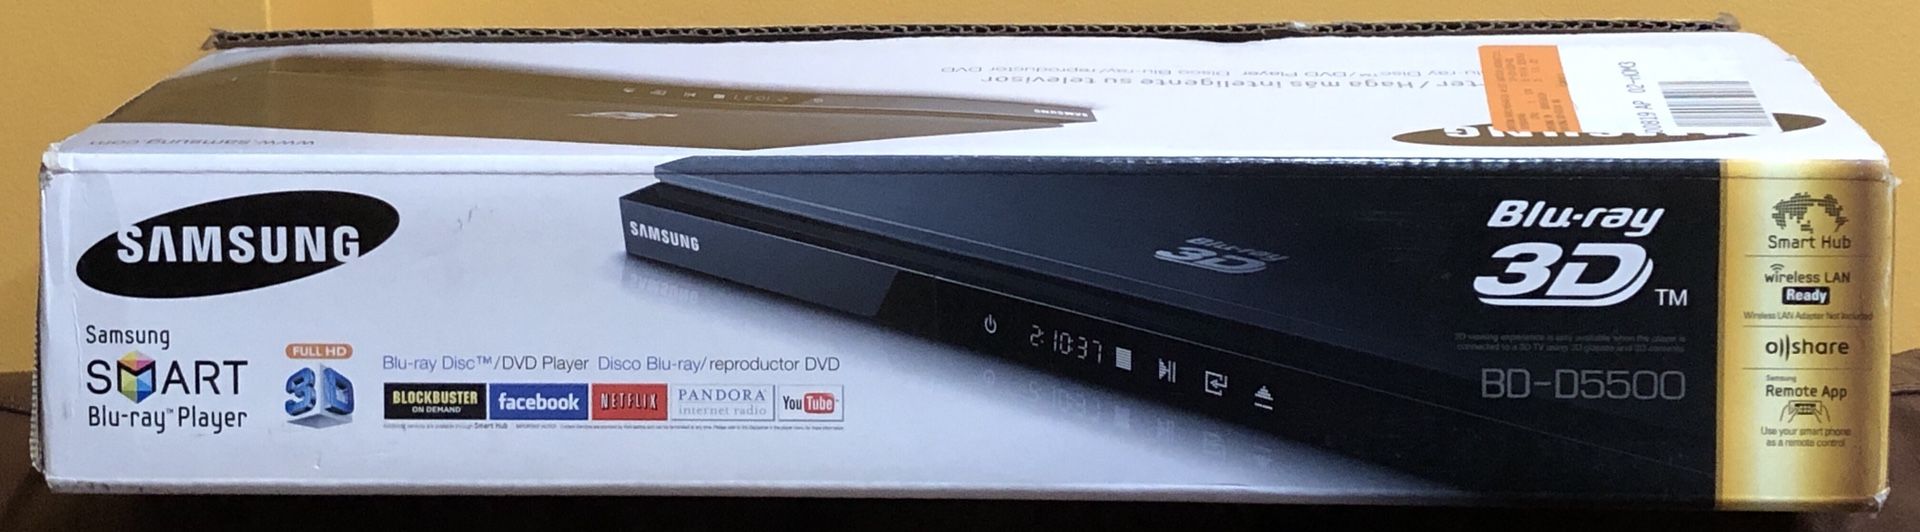 Samsong 3 D Blu- Ray Disc/DVD Player with two 3 D glasses